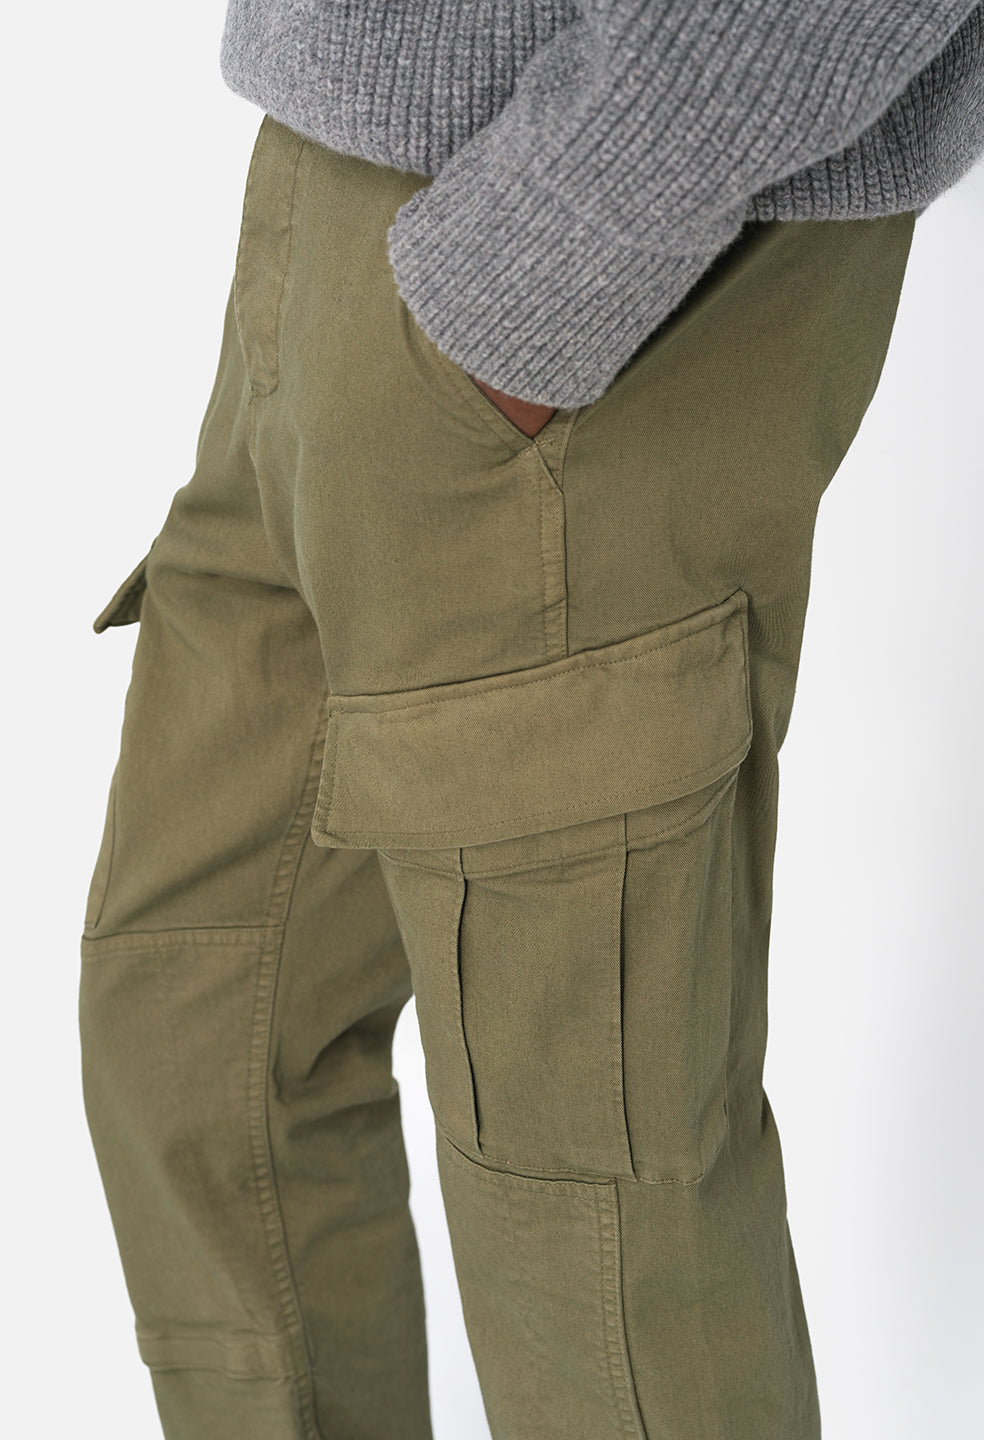 Thin Cargo Pants - The Tactical Life